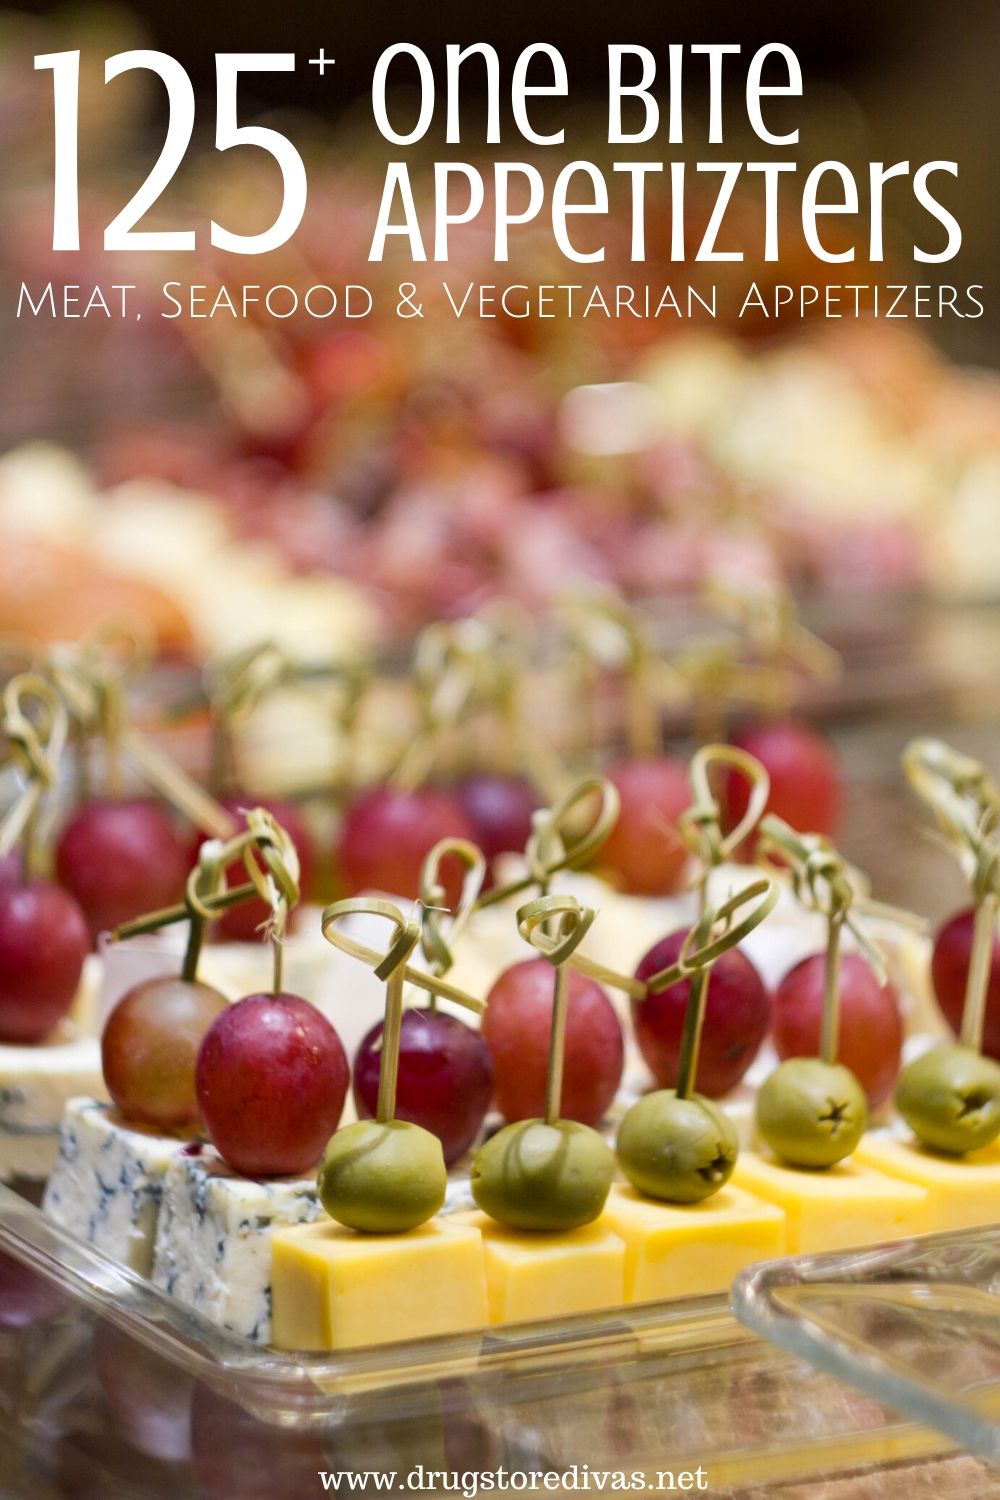 Change up your menu for your summer parties and get inspired by our list of 100+ one-bite appetizers here: https://www.drugstoredivas.net/one-bite-appetizers/ There are meat and seafood appetizers, plus vegetarian options as well!